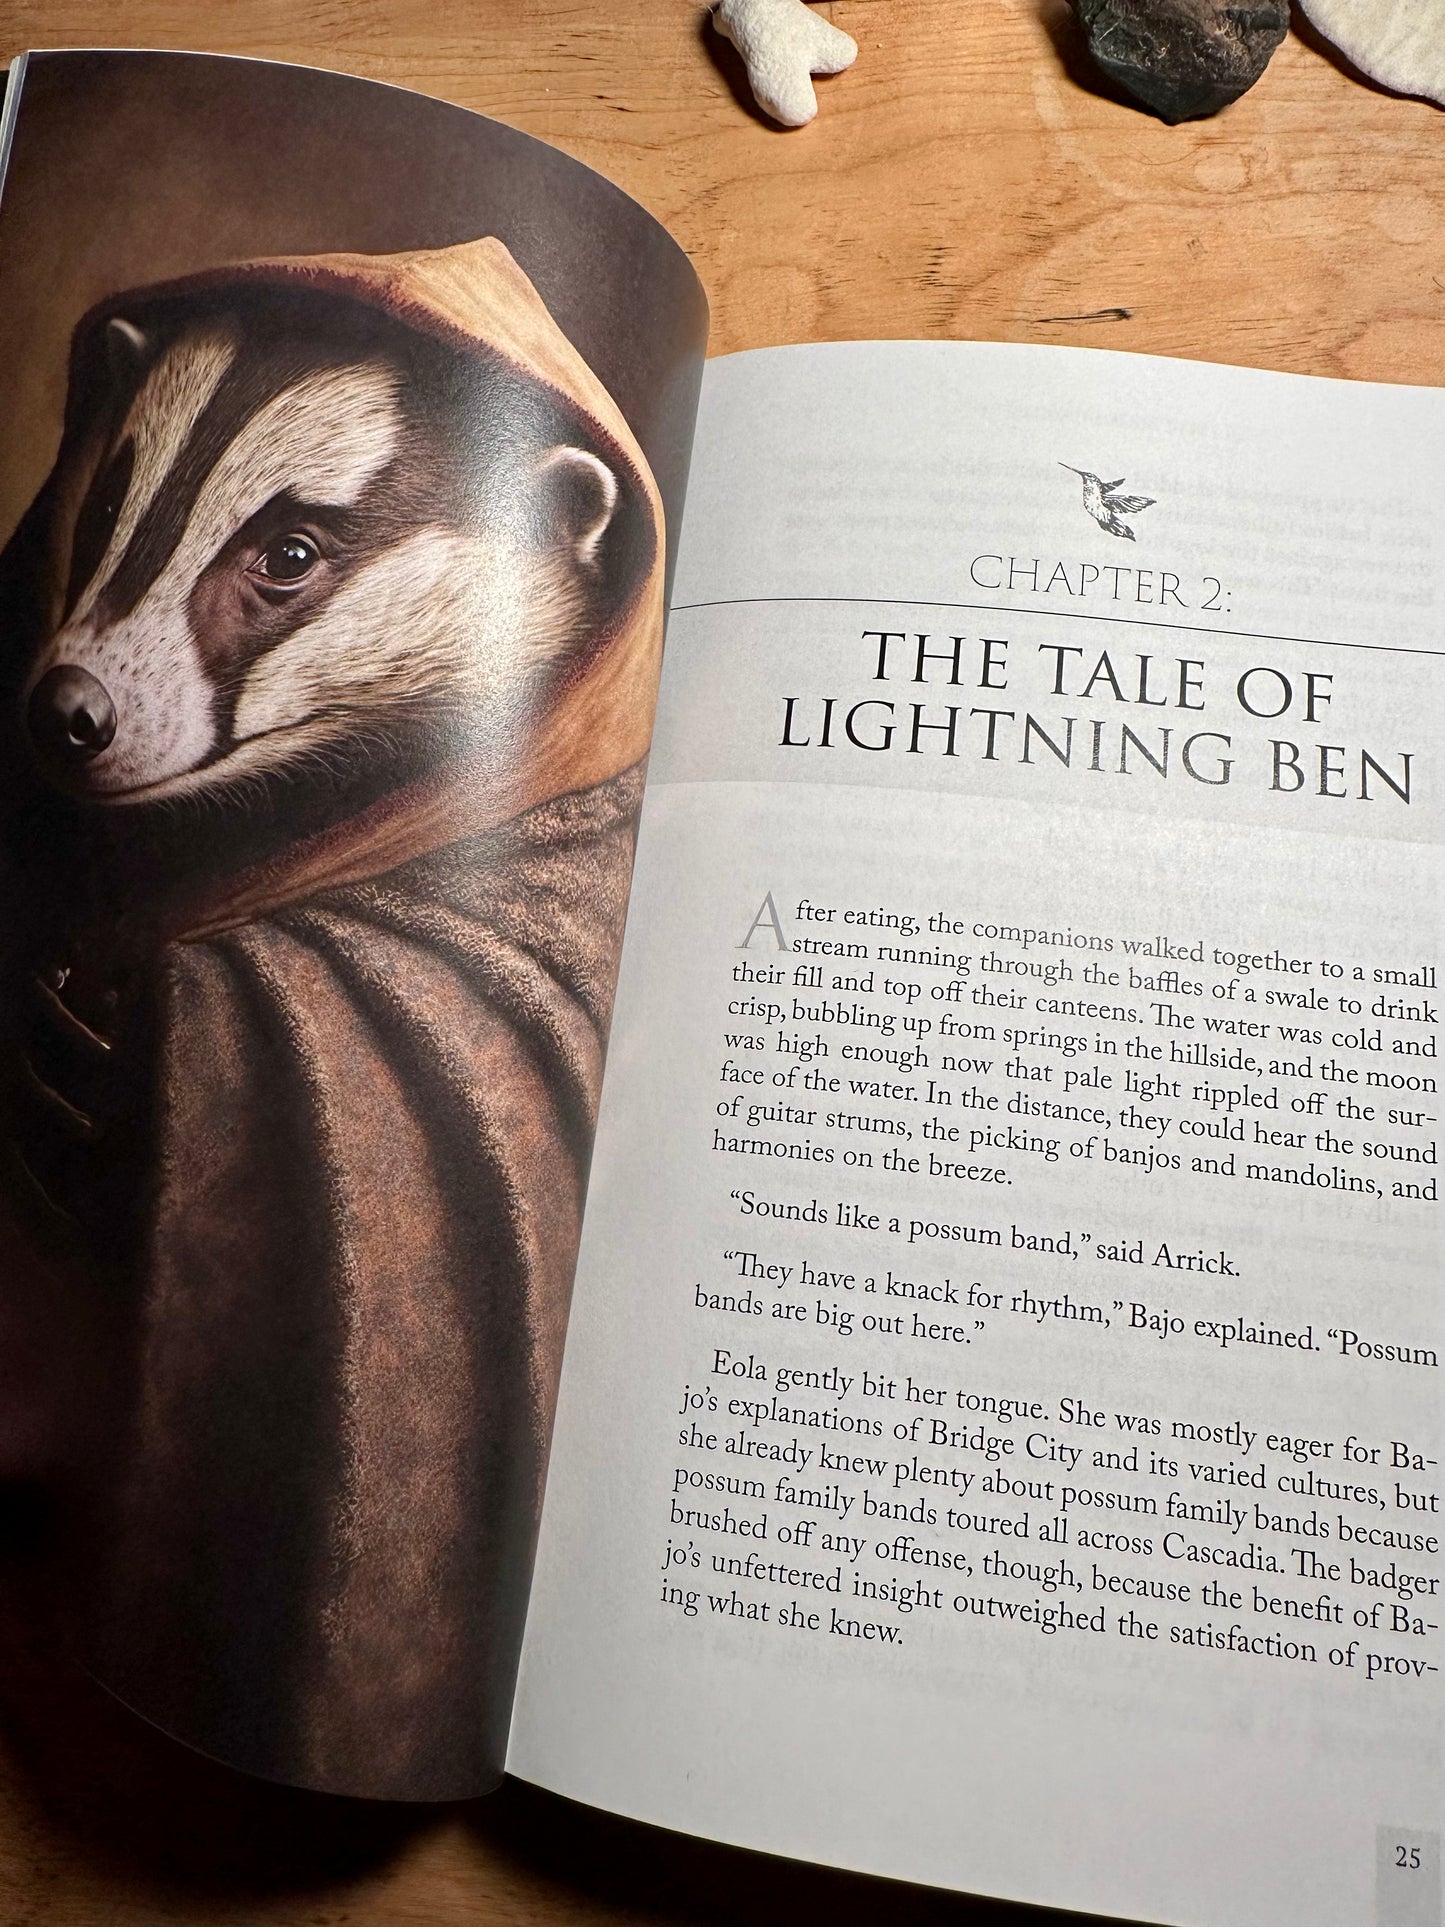 The blue beacon paperback opened to chapter 2, and an image of an American badger wearing a brown cloak named Eola Lightstripe. The title of the second chapter is the tale of lightning ben